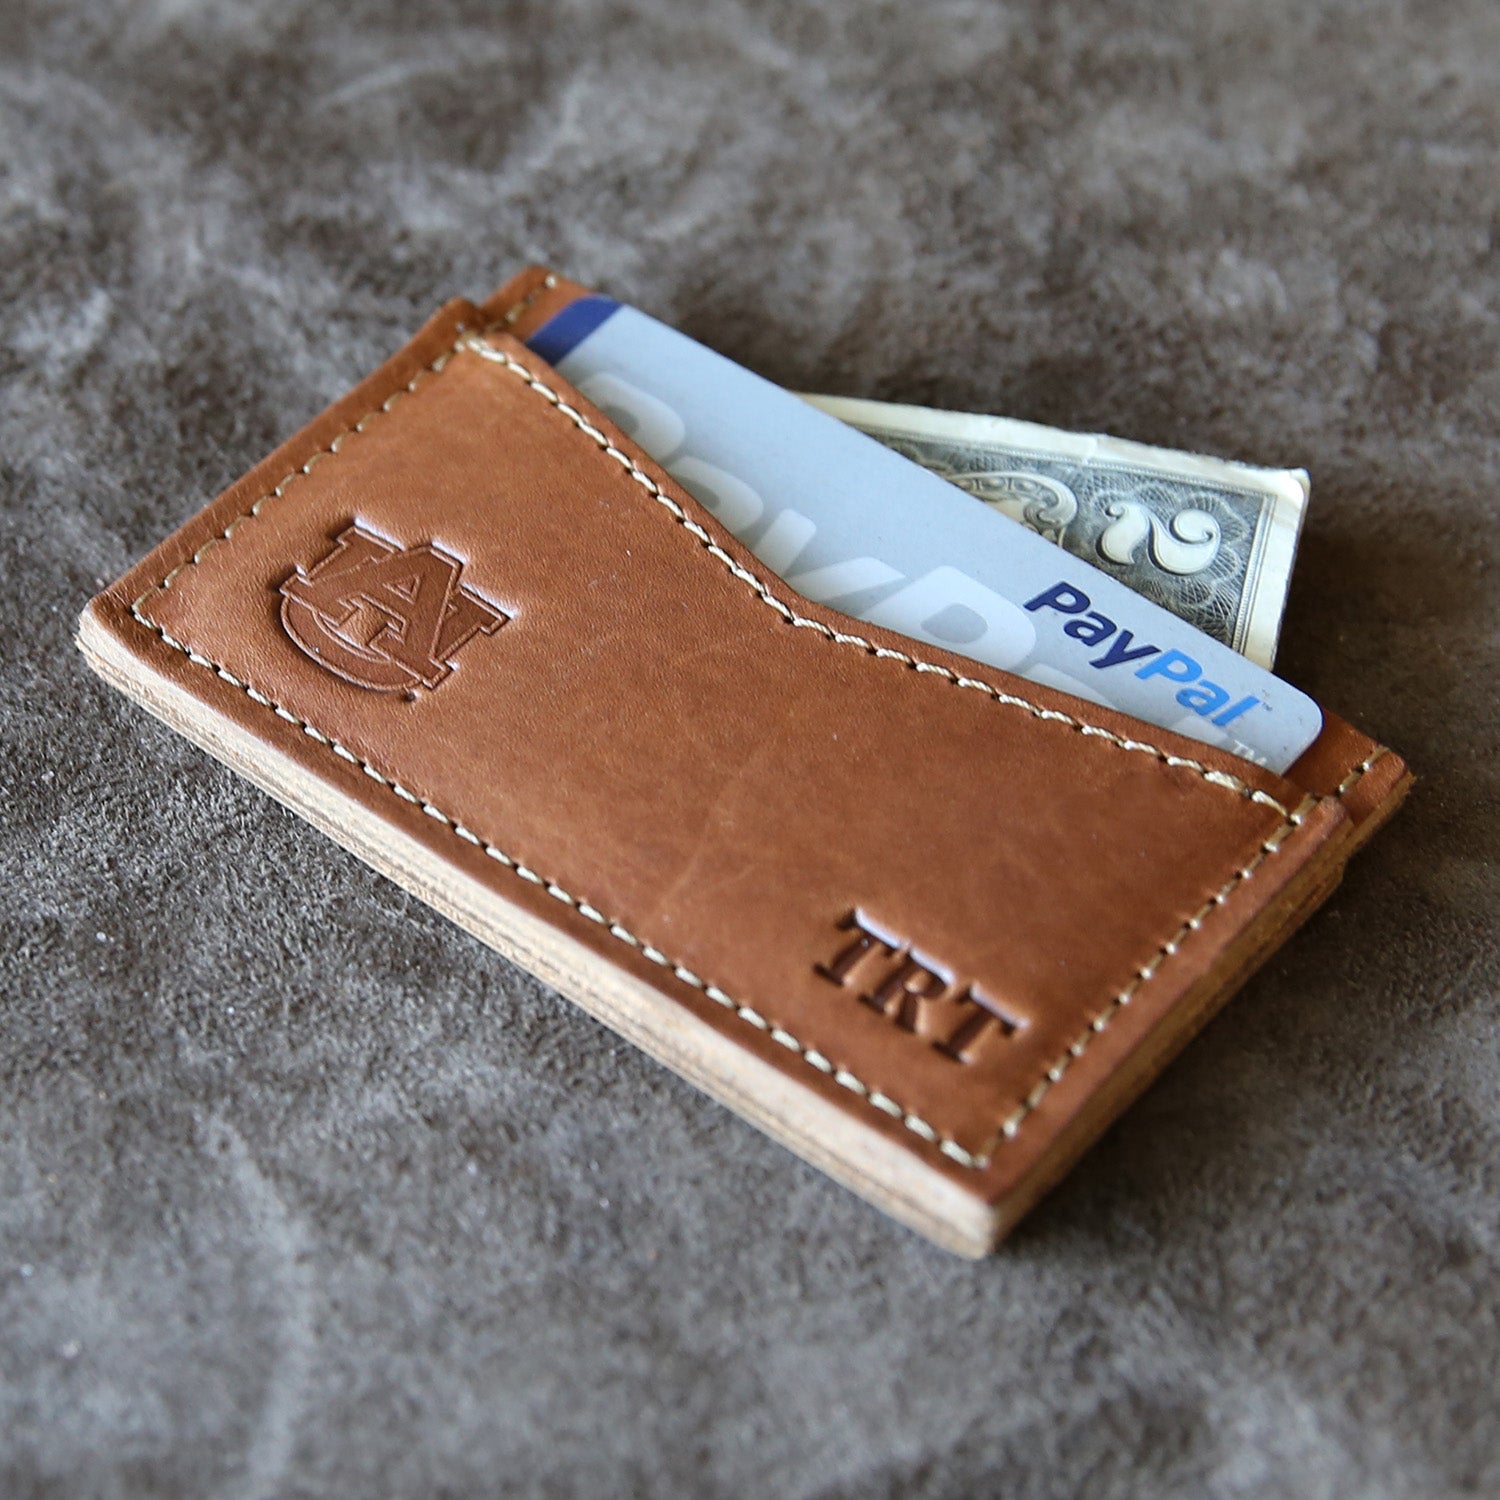 Fine leather front pocket card holder wallet with Auburn logo and personalized initials